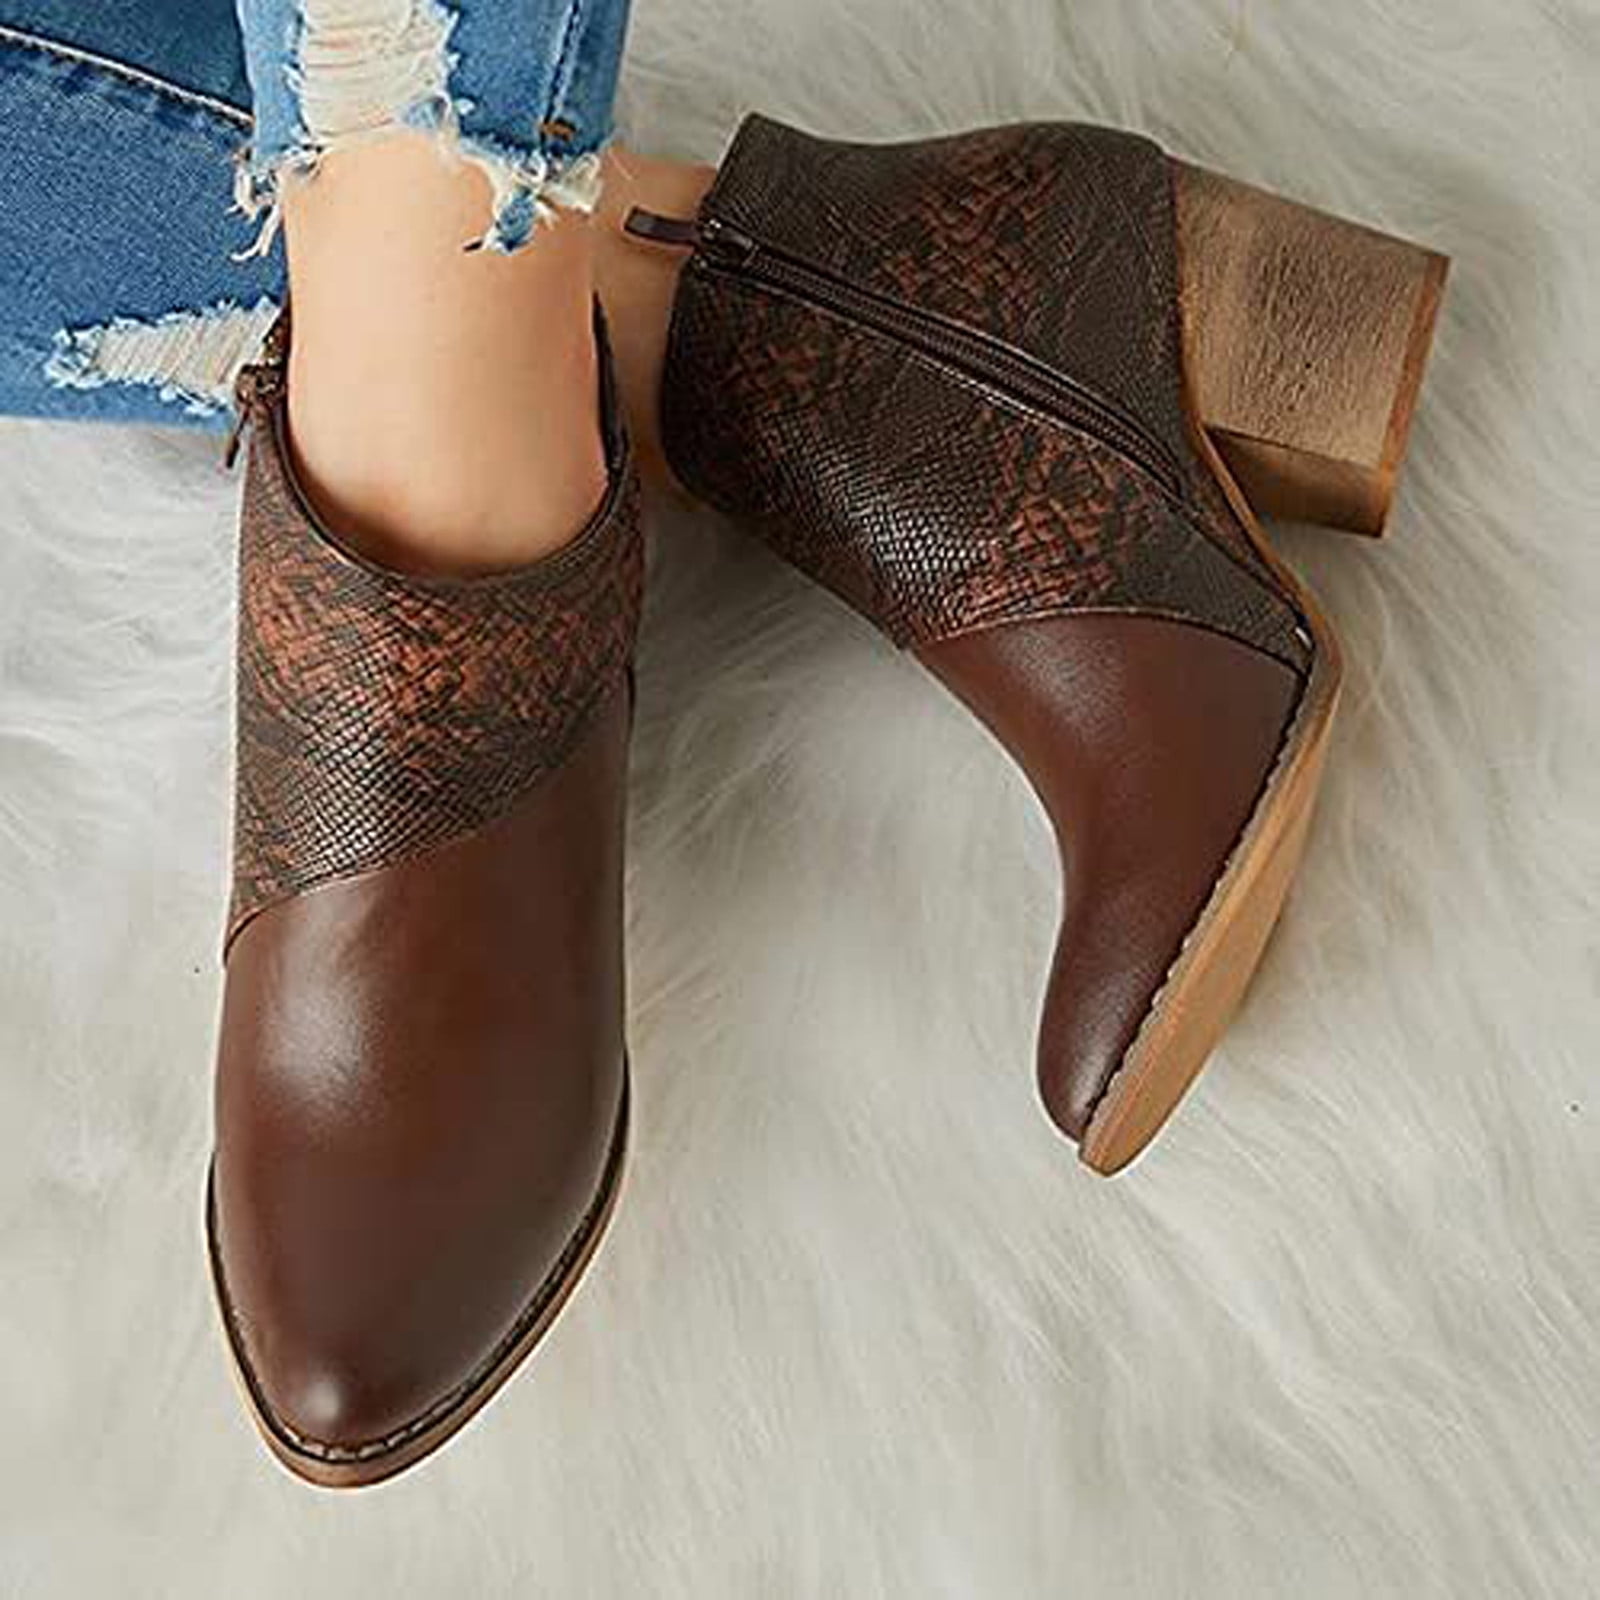 Comfy Faux Leather Fashion Patchwork Square Toe Mid-Calf Boot Shoes for Women Womens Lace Up Riding Boots Medium Chunky Heel Booties Side Zipper 